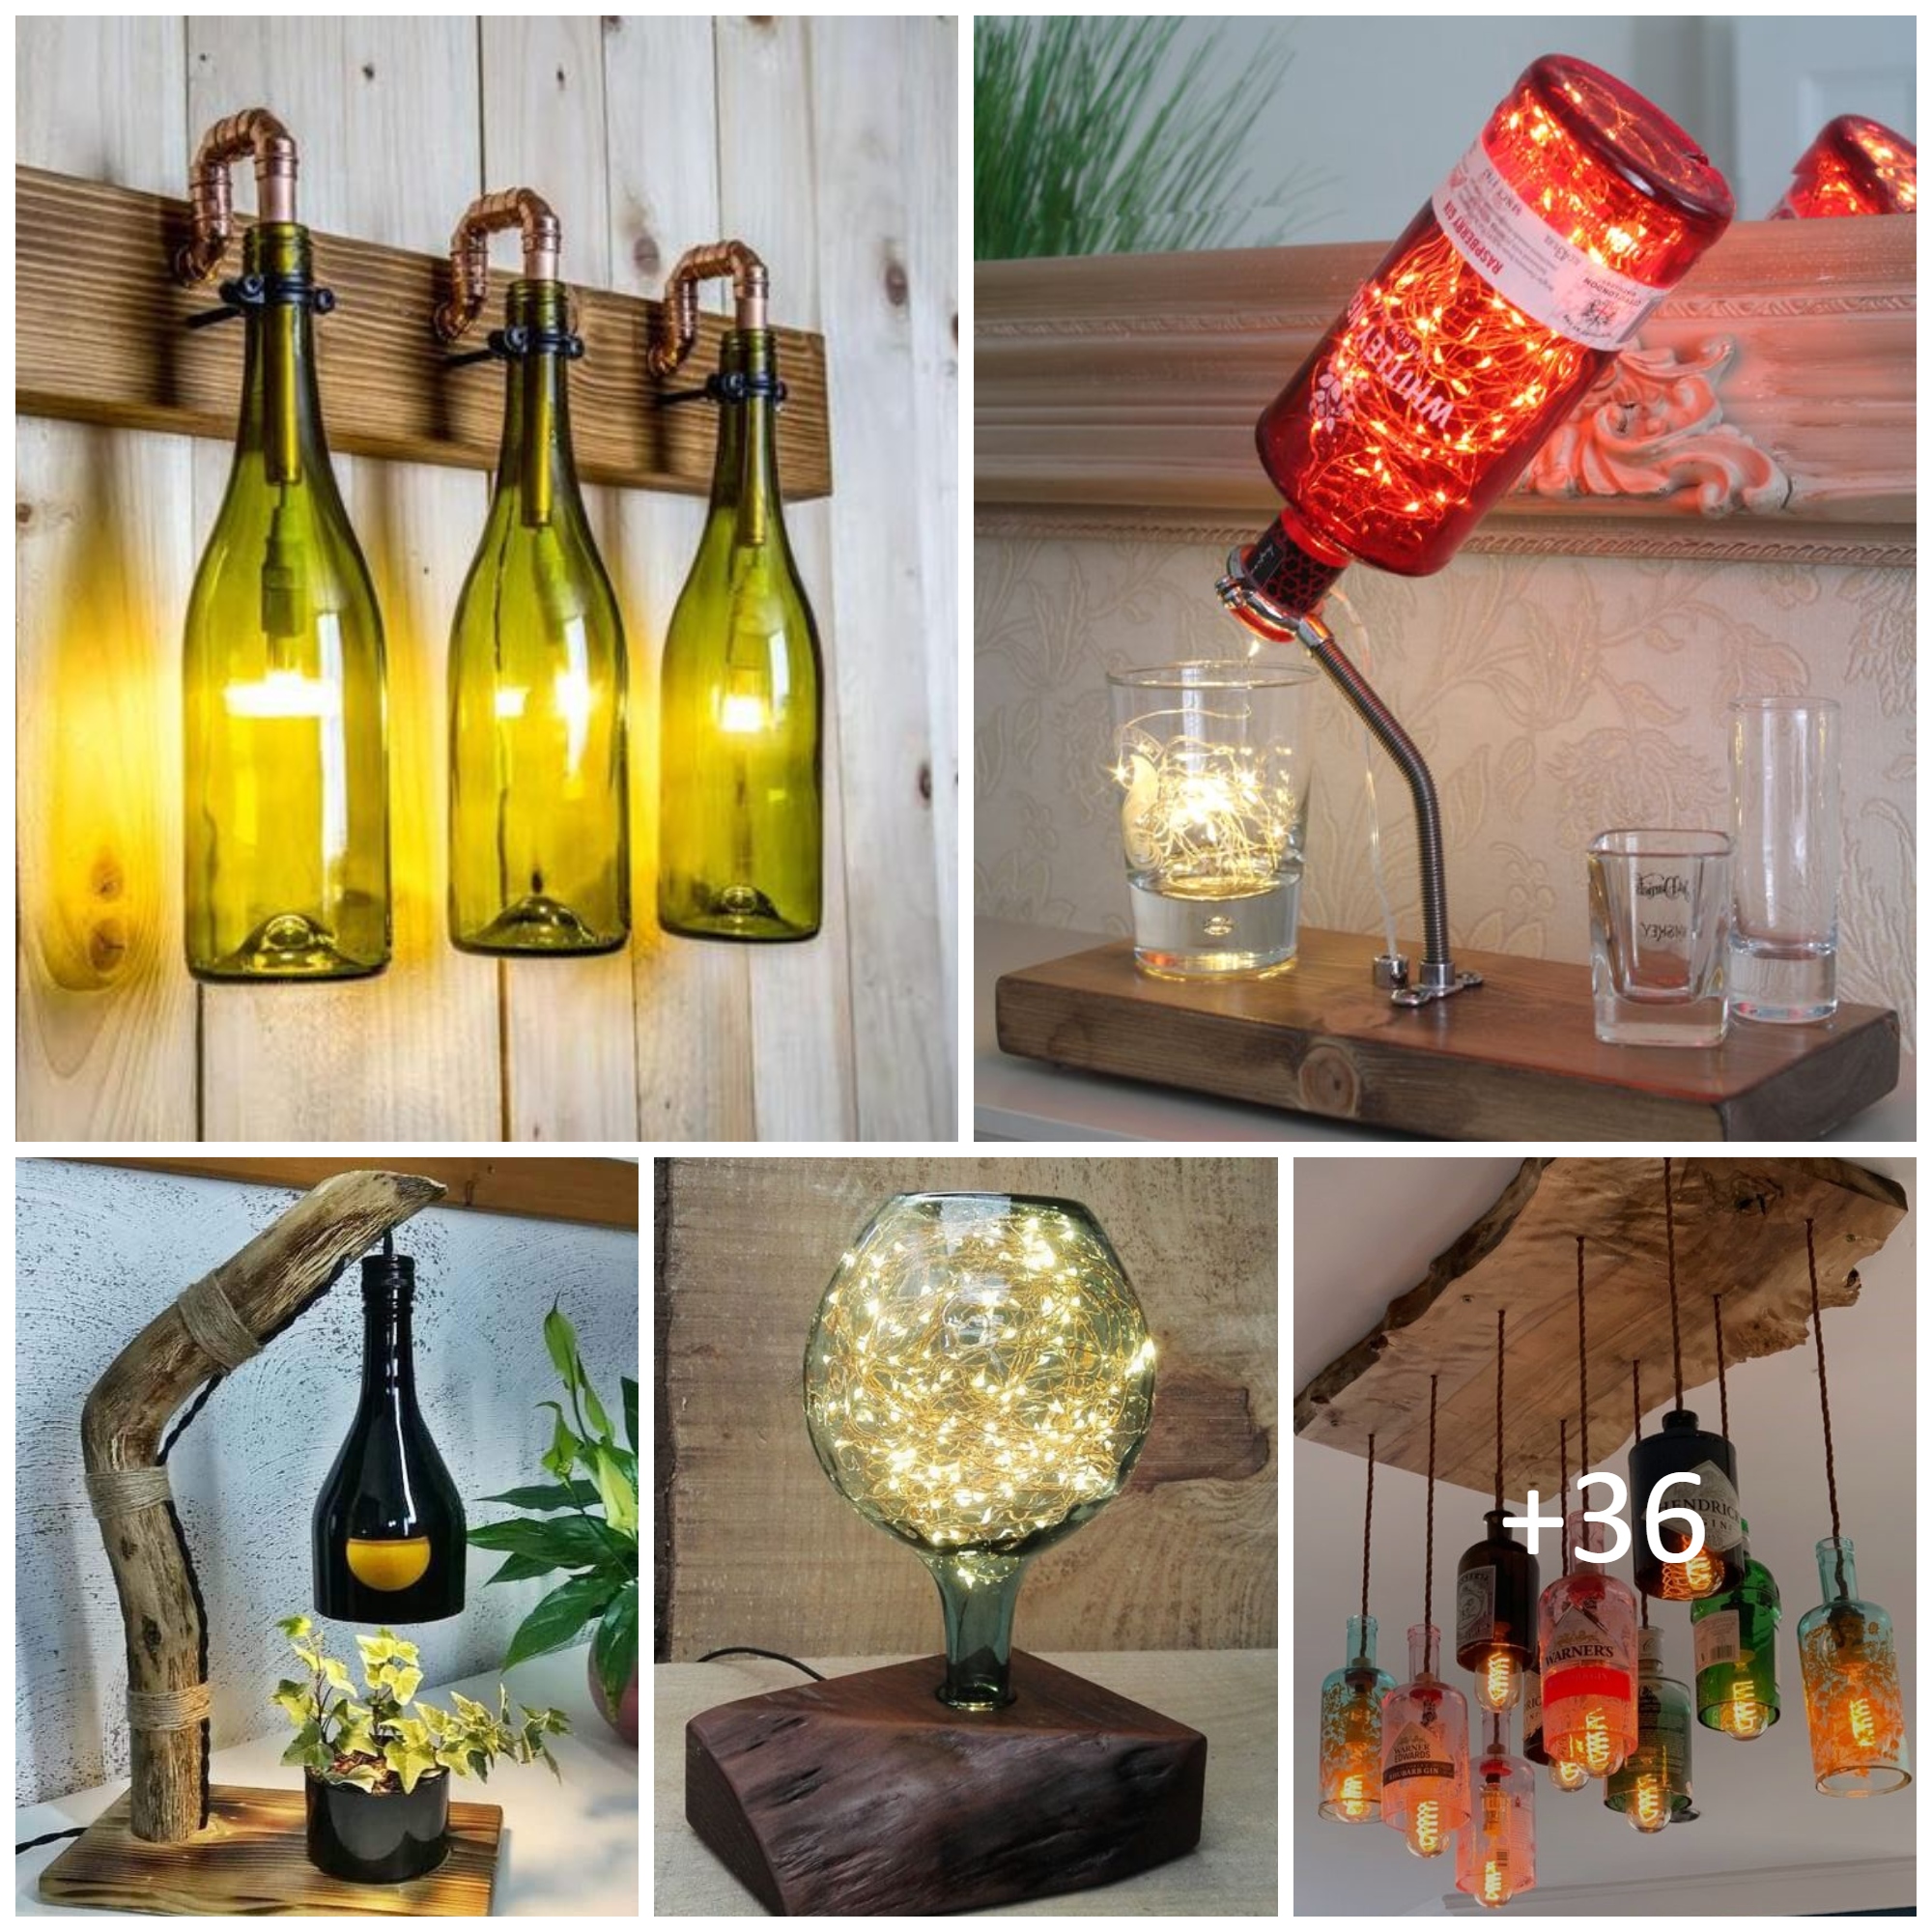 Bottle Lamps Decor Ideas That Will Add Uniqueness To Your Home